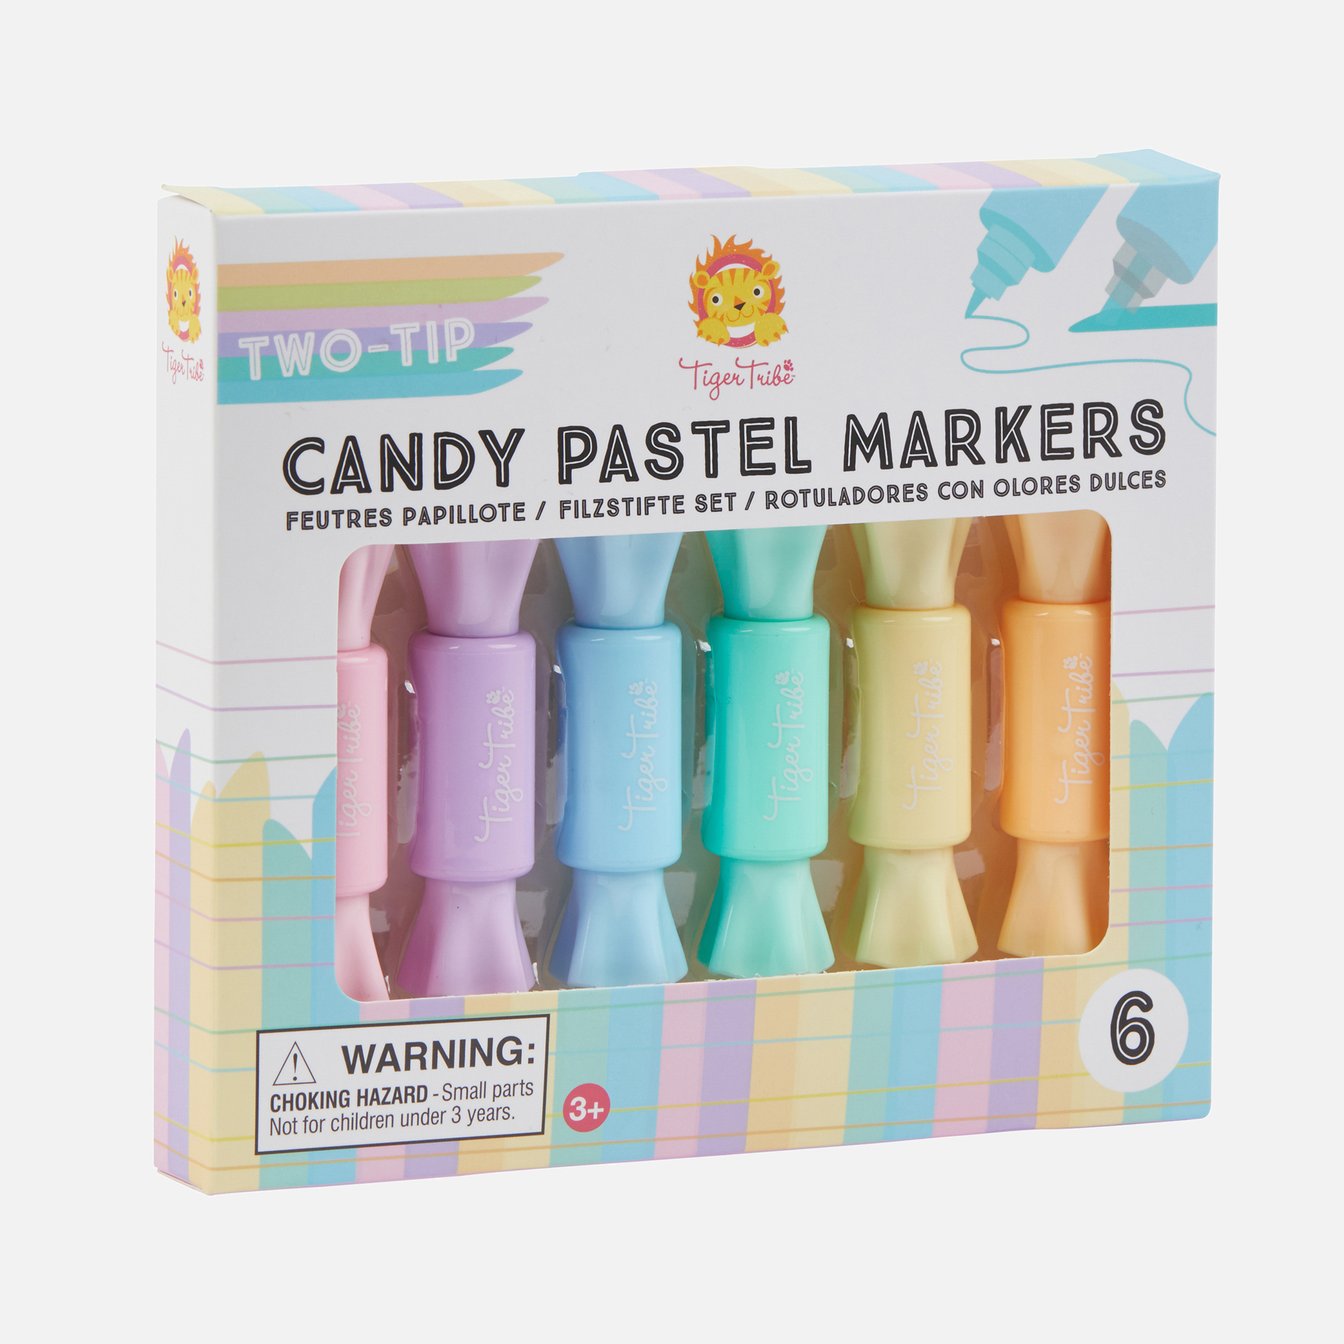 Tiger Tribe | Two-Tip Candy Pastel Markers - 6pk